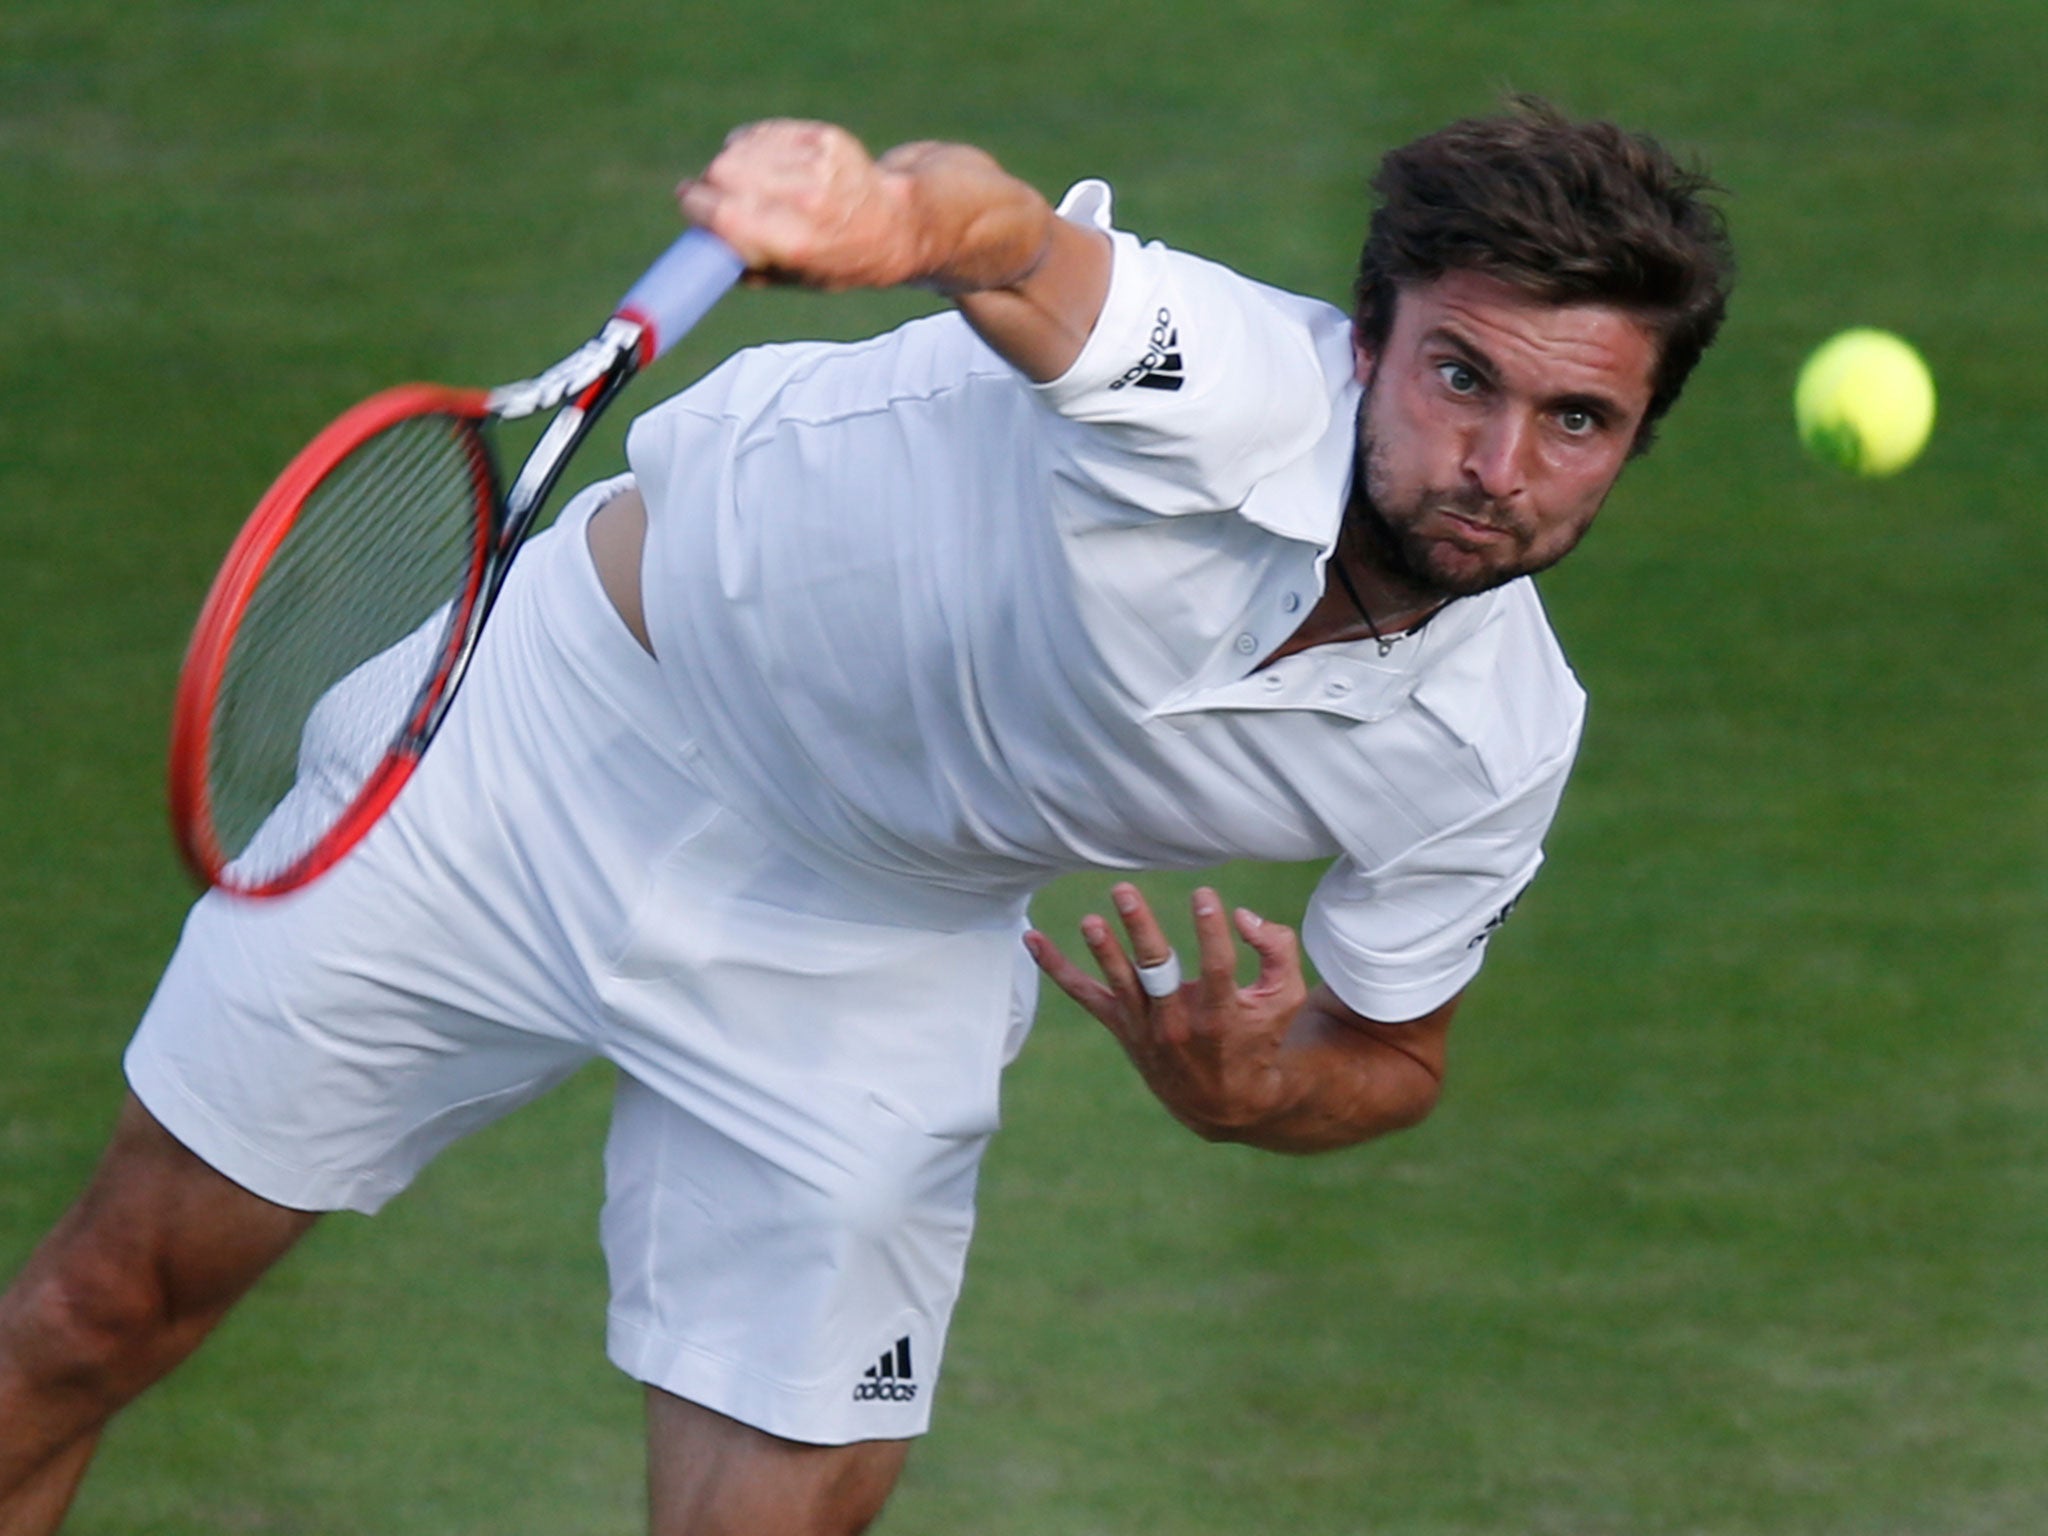 Gilles Simon is still going strong in the competition despite lacking the power of some of his playing rivals